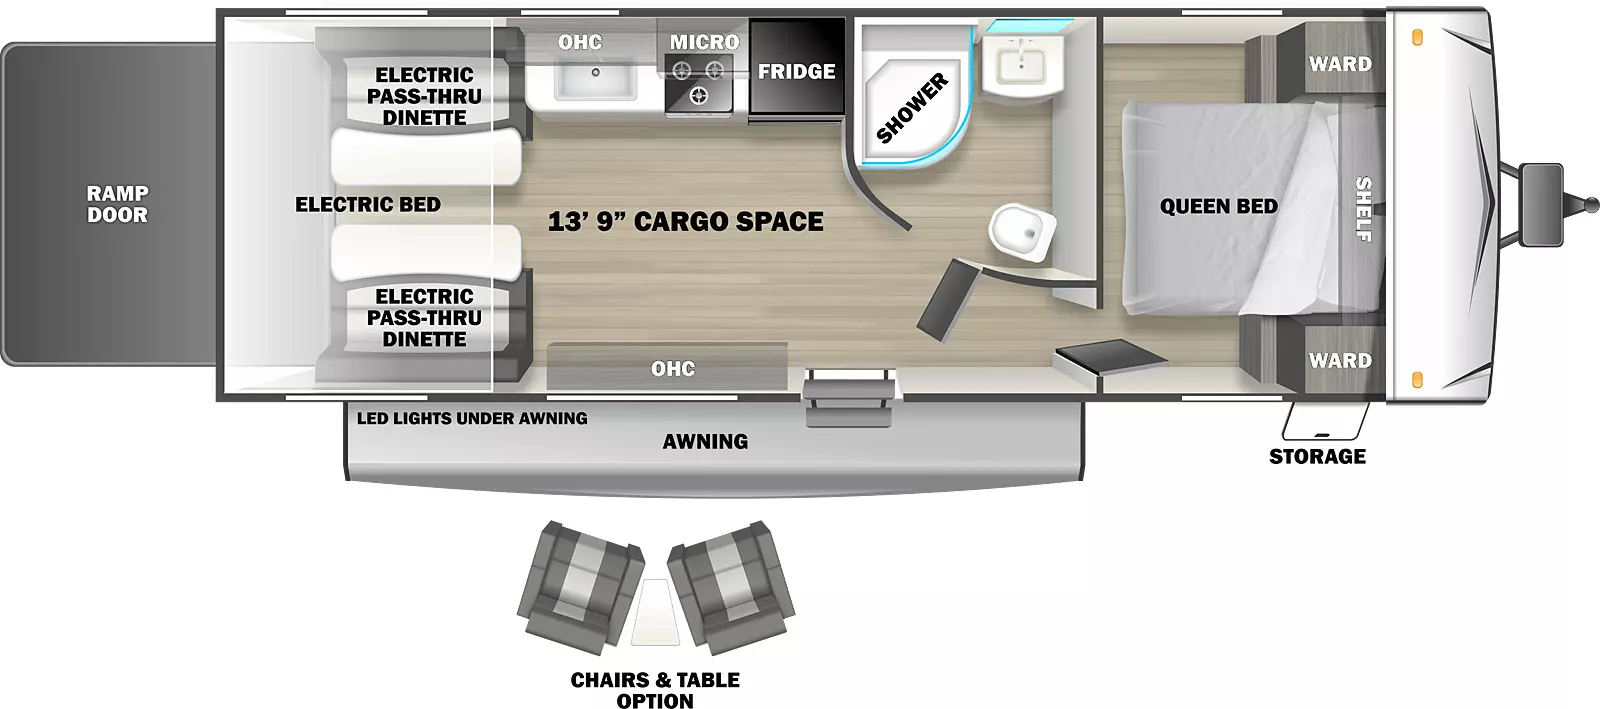 The 242SLC Toy Hauler has one entry door, a rear ramp door, and an electric awning. Storage access is available in he front door side exterior. The RV has a 13 foot 9 inch cargo space. The RV has a 13 foot 9 inch cargo area. The entry door leads to a living area on the left and a hallway on the right. Directly to the left of the entry door are overhead storage cabinets. A dinette and table are in the rear door side of the RV. A ramp door makes up the rear wall of the RV. A dinette and table are in the rear off door corner of the RV. A kitchen area is to the right of the off door side dinette. The kitchen has a countertop with a sink and a stove. Overhead storage is above the sink and a microwave is above the stove. A refrigerator is to the right of the stove. A hallway is to the right of the entry door. A door on the left leads to the bathroom. The bathroom has a shower, sink, and toilet. A door straight ahead in the hallway leads to the bedroom in the front of the RV. The bedroom has a queen bed with a shelf above it. Night stands and wardrobes are on the right and left of the queen bed.